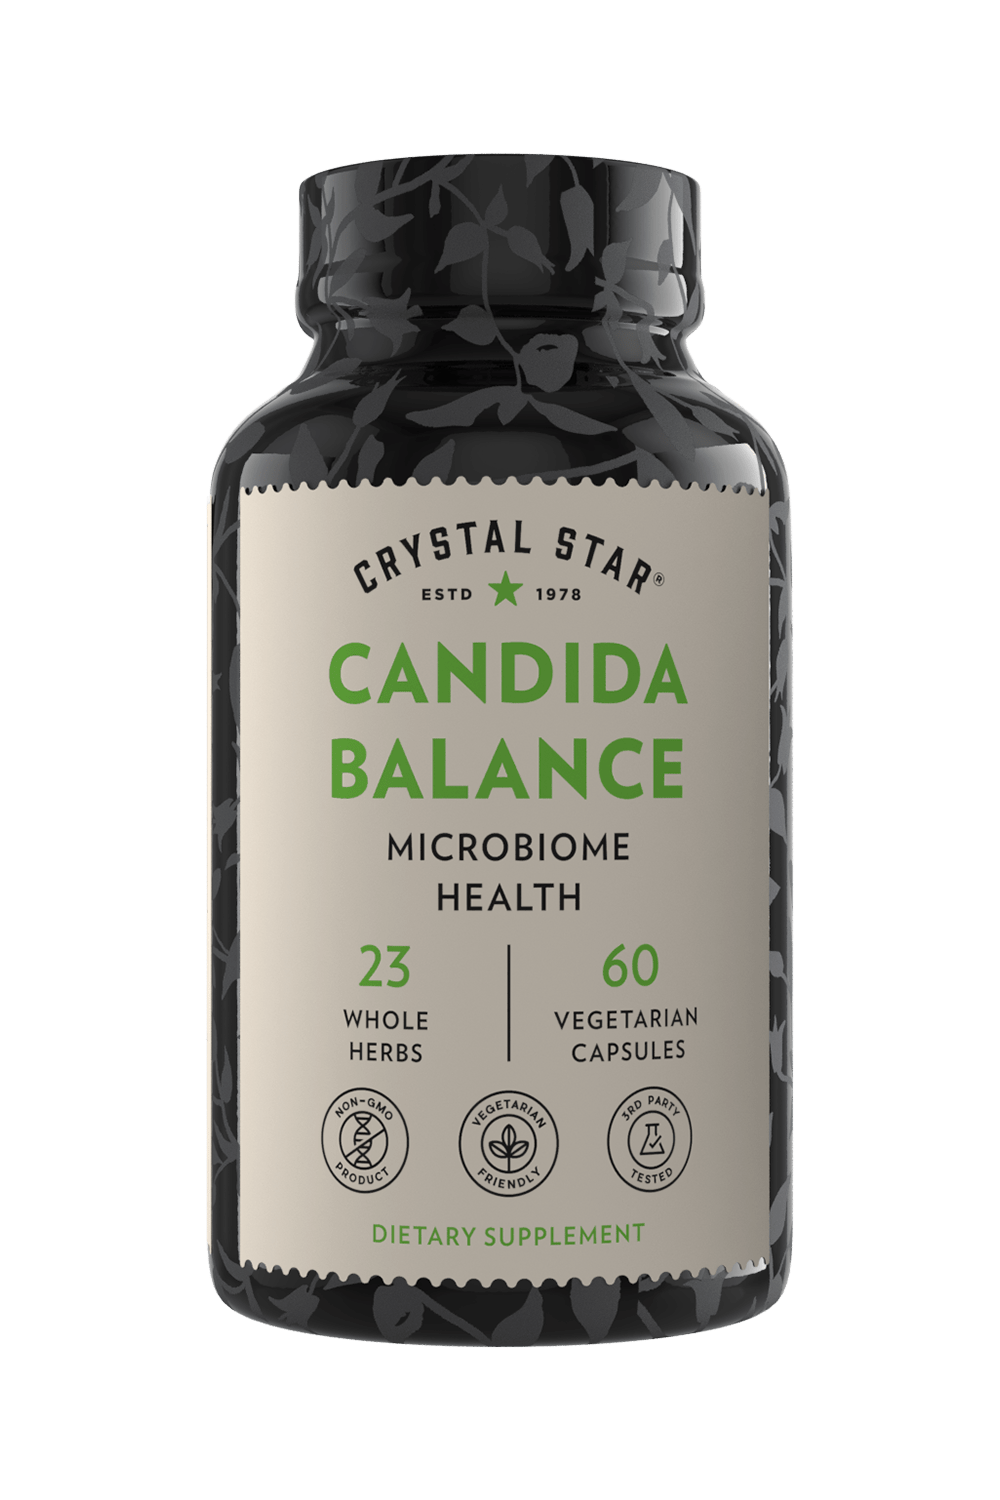 Crystal Star Candida Balance supplement for microbiome health, Front Side